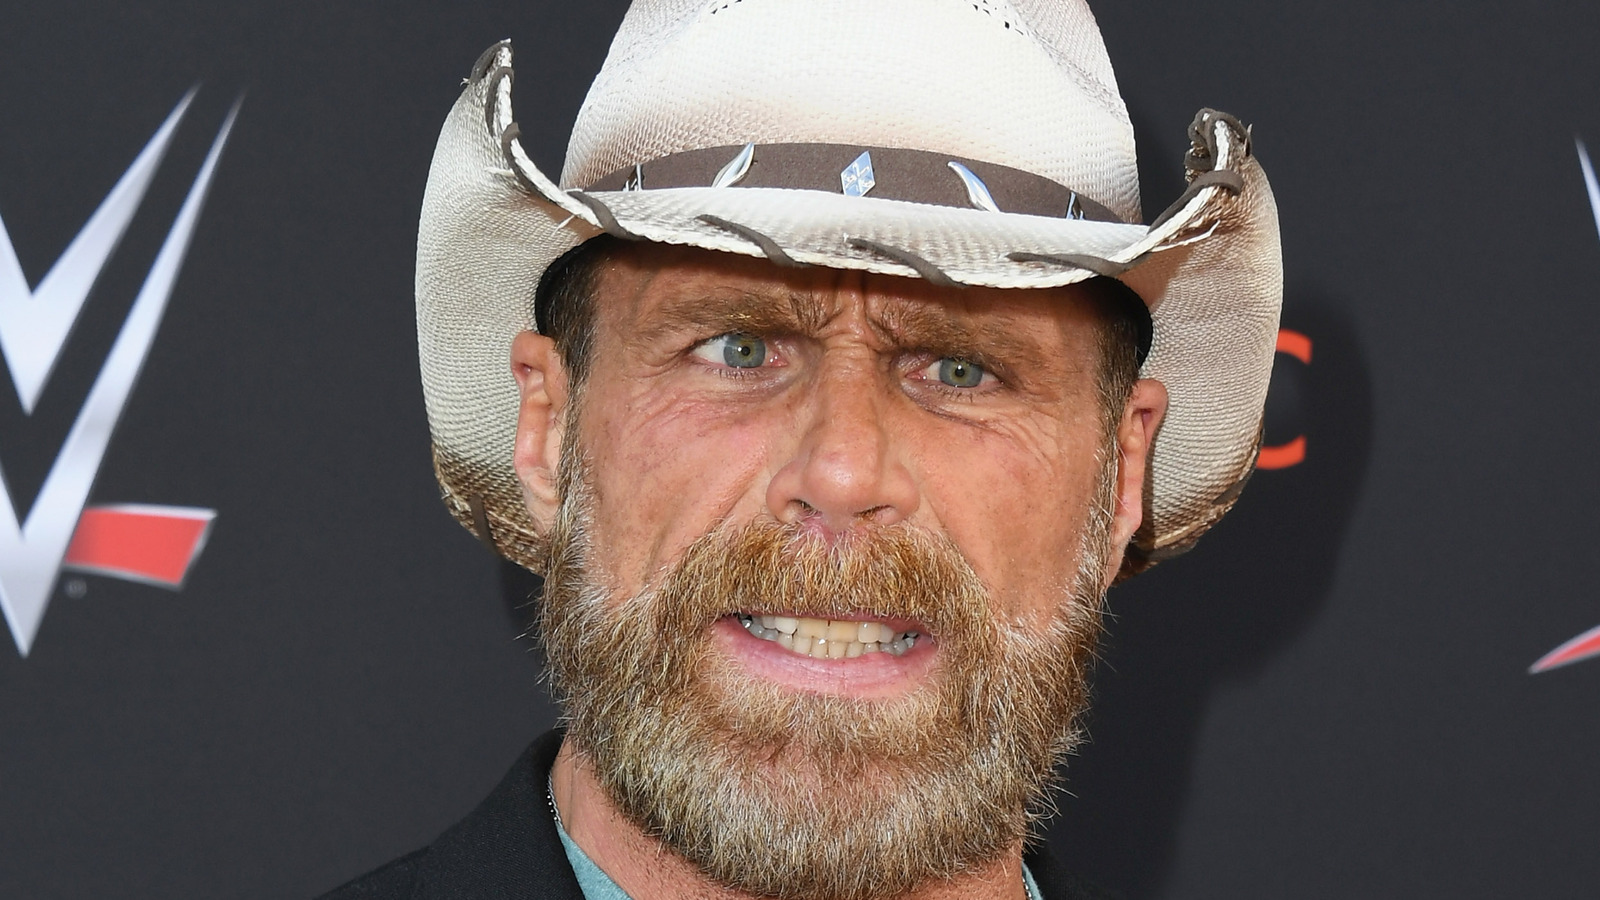 Shawn Michaels Gives Update On WWE Coaching Position